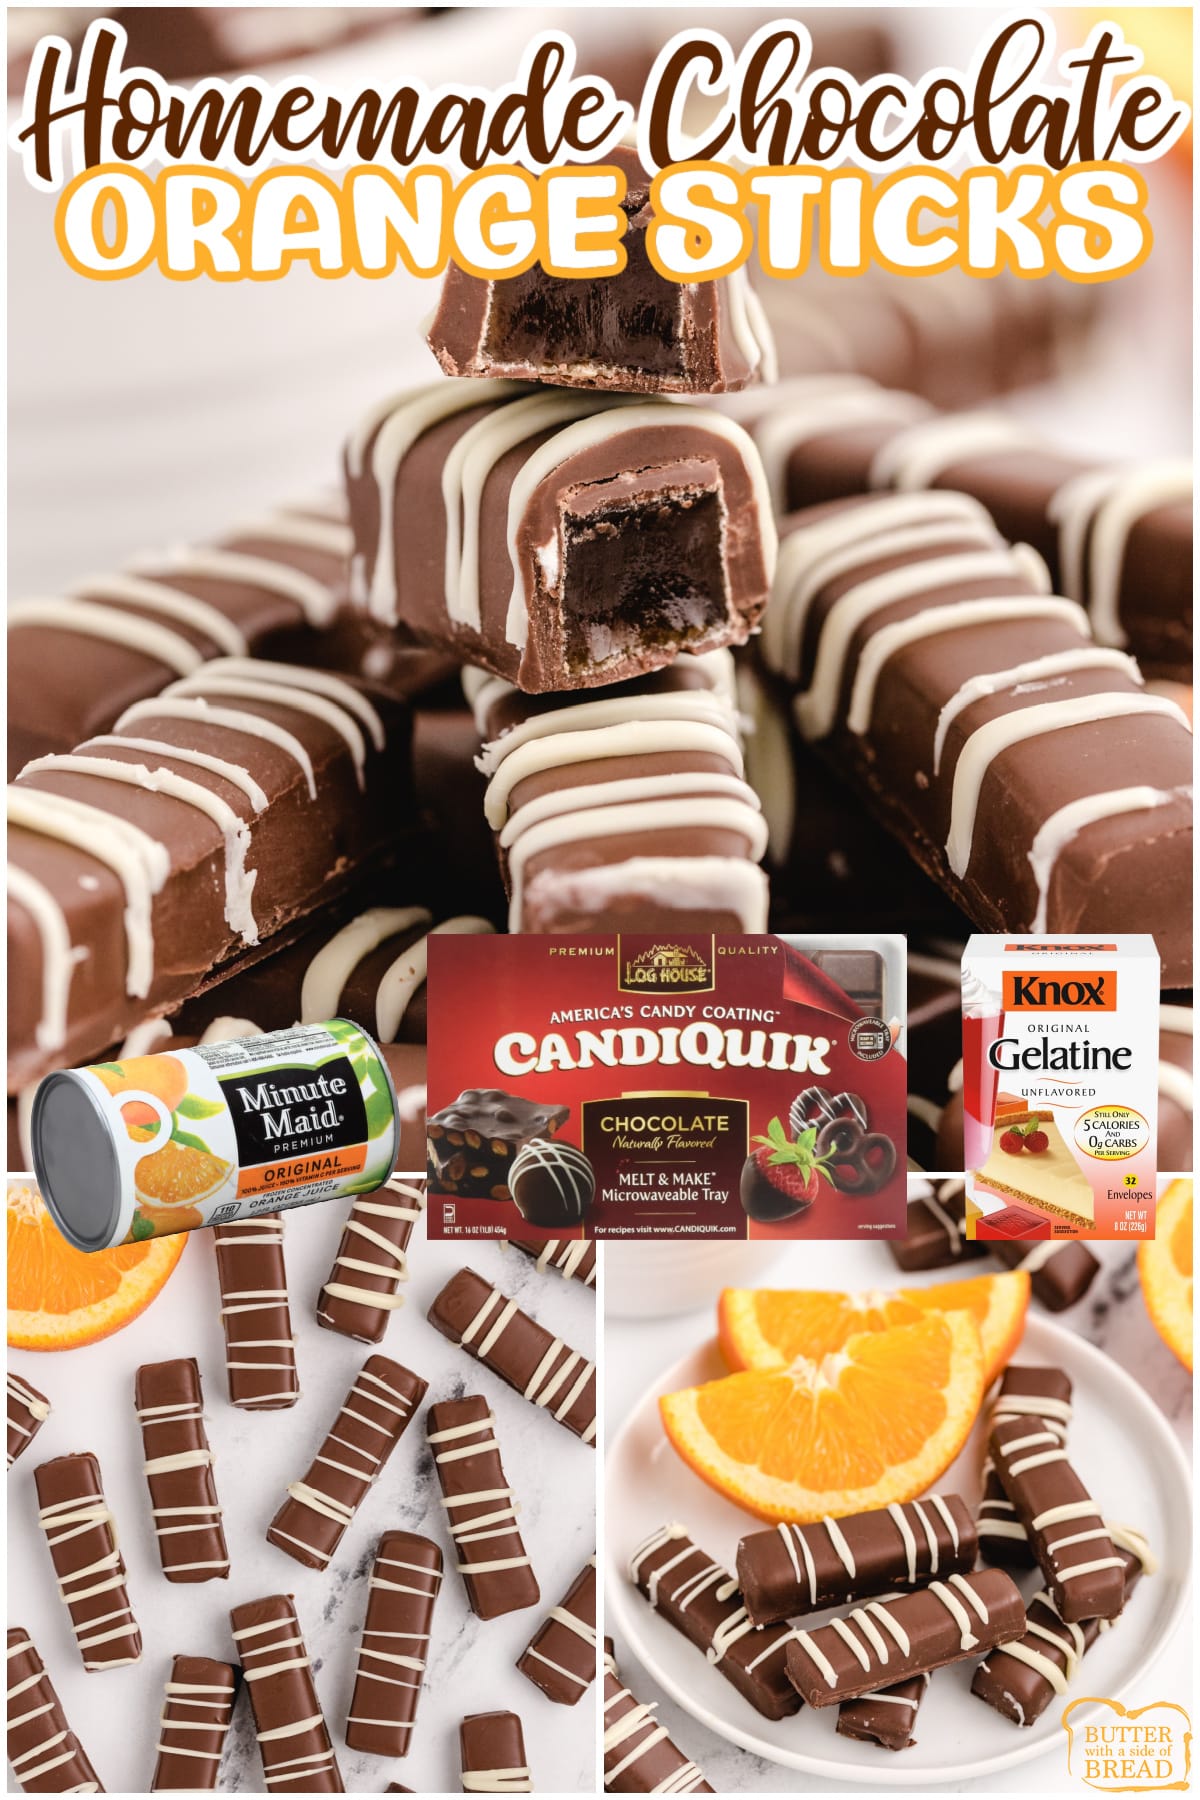 Homemade Chocolate Orange Sticks are made with a delicious orange jelly filling dipped in melted chocolate.  Simple chocolate candy recipe that is so easy to make! 